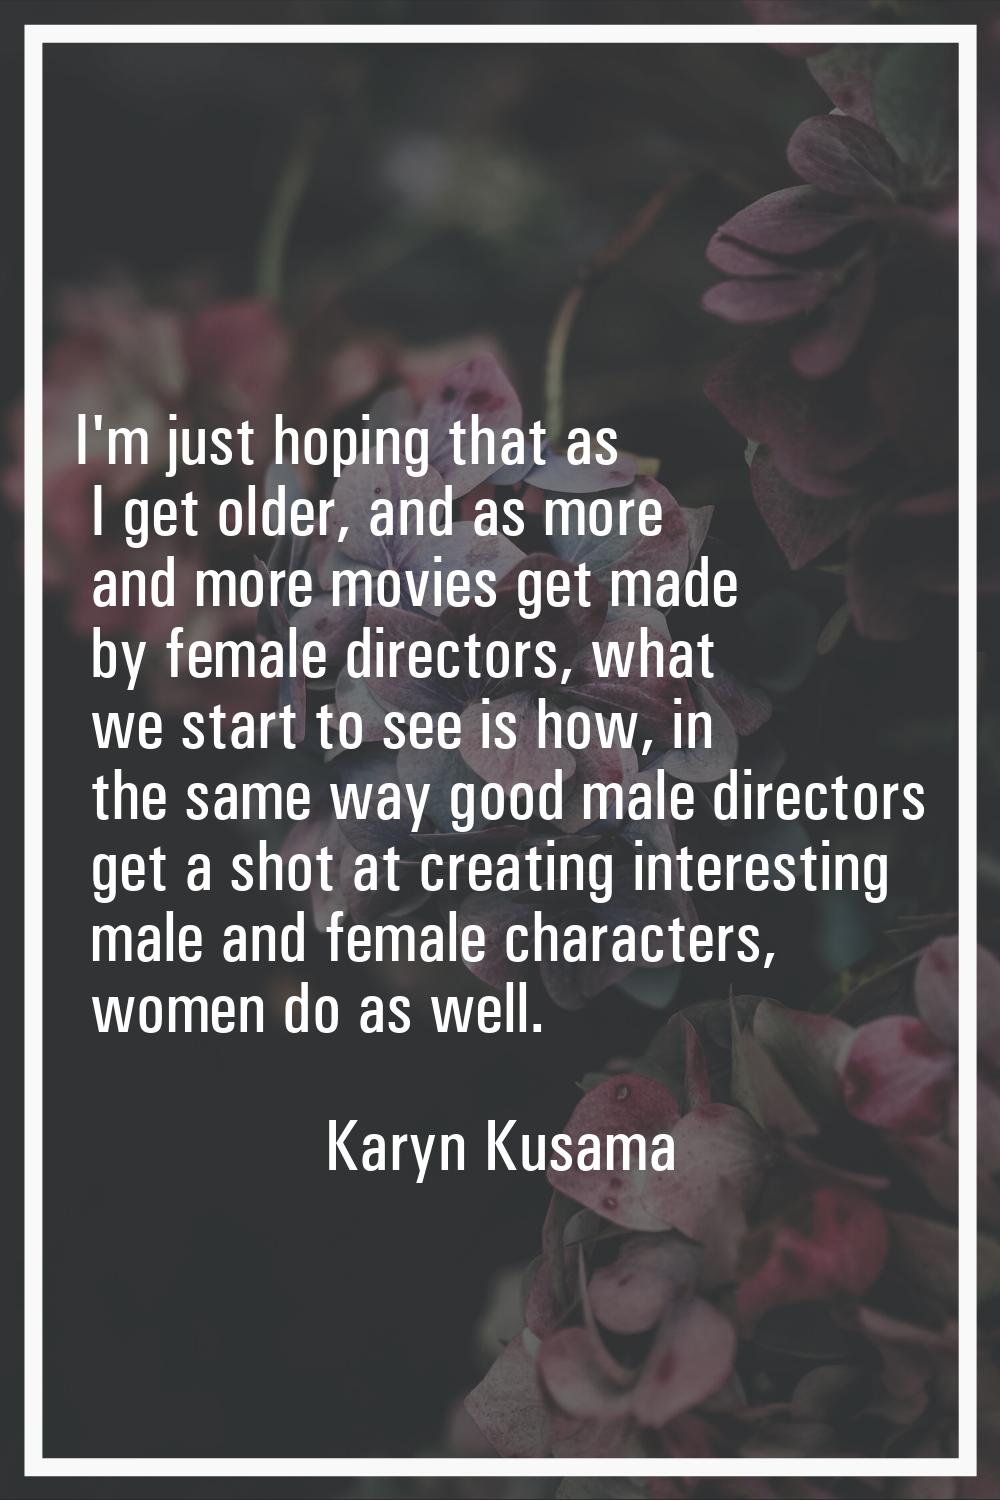 I'm just hoping that as I get older, and as more and more movies get made by female directors, what